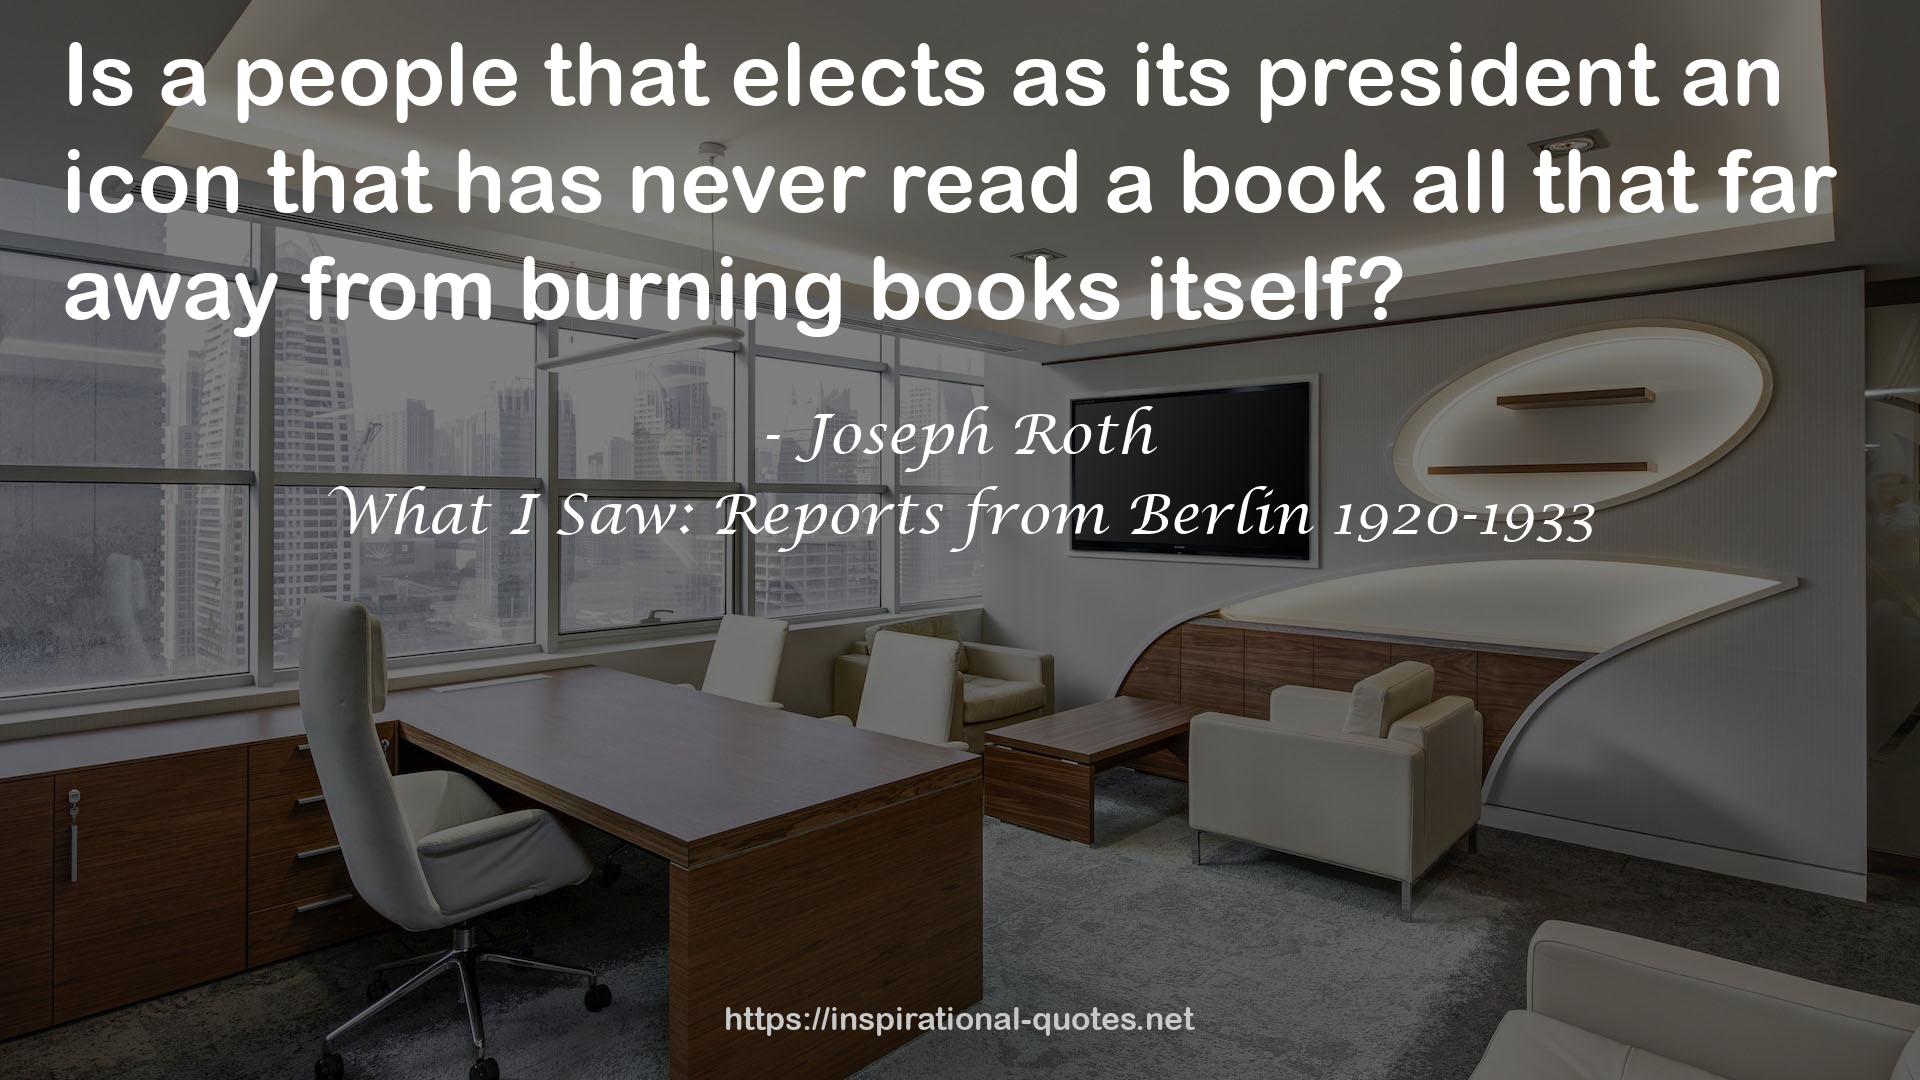 What I Saw: Reports from Berlin 1920-1933 QUOTES